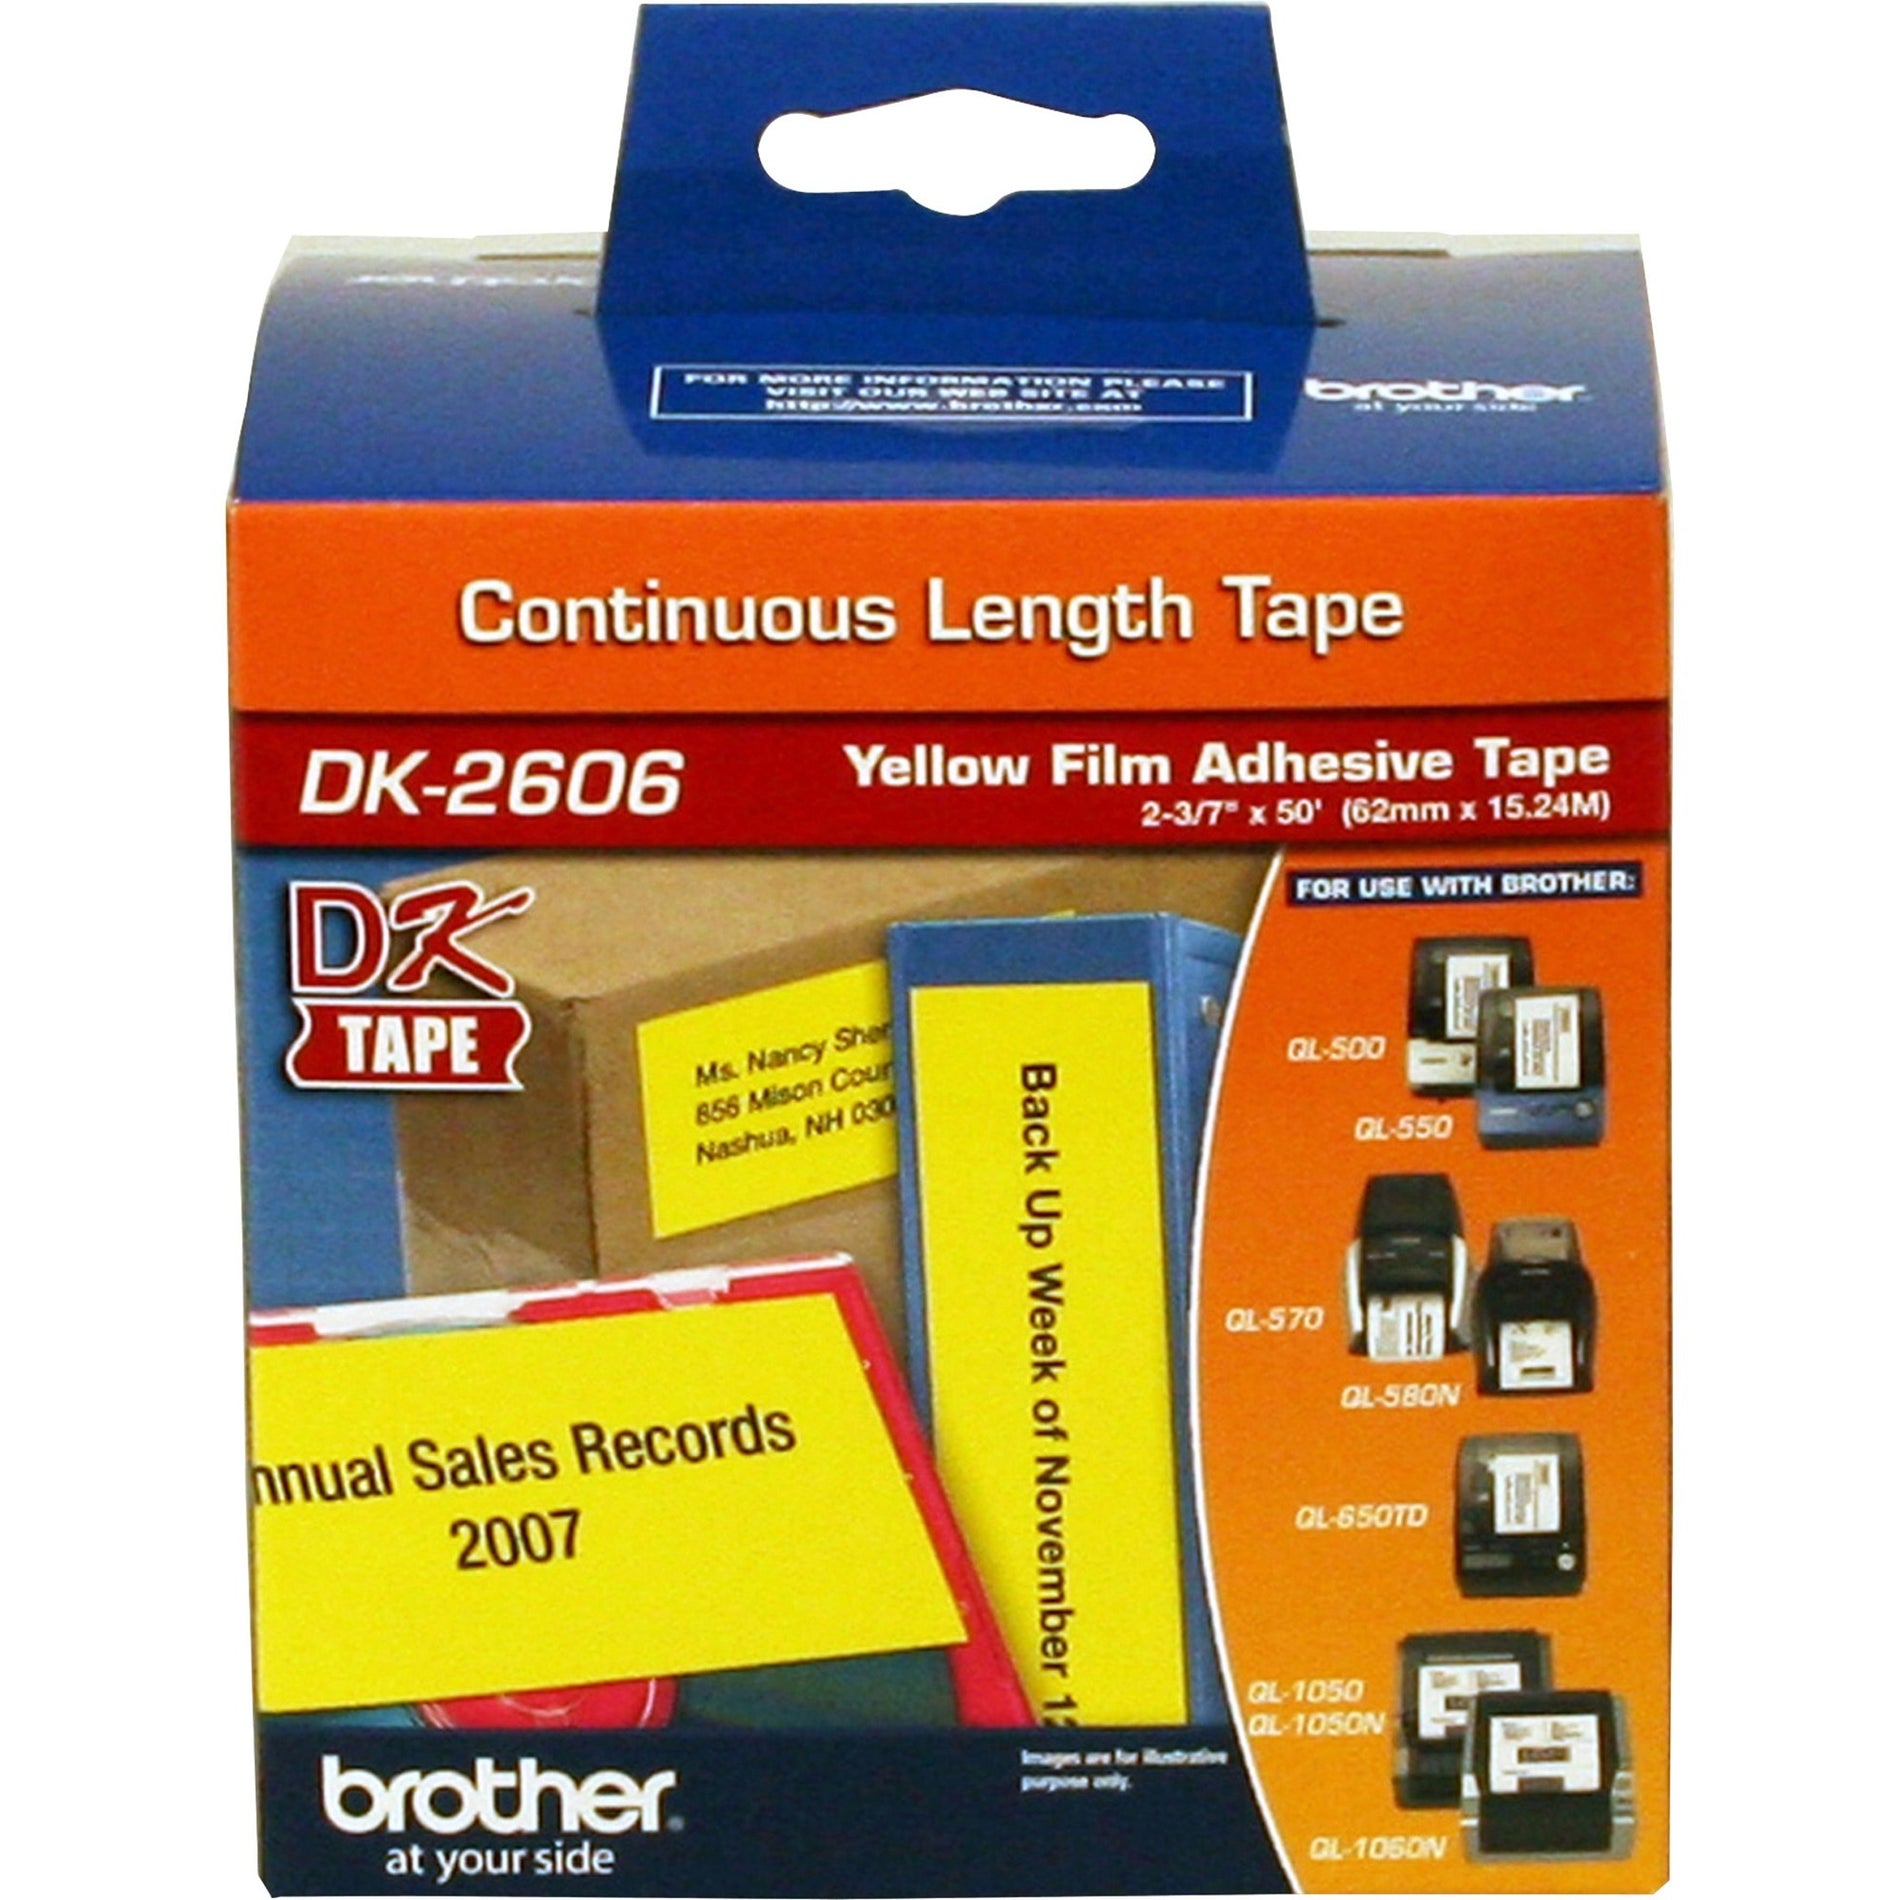 Brother DK2606 Continuous Length Film Tape, 2-3/7"x100', White